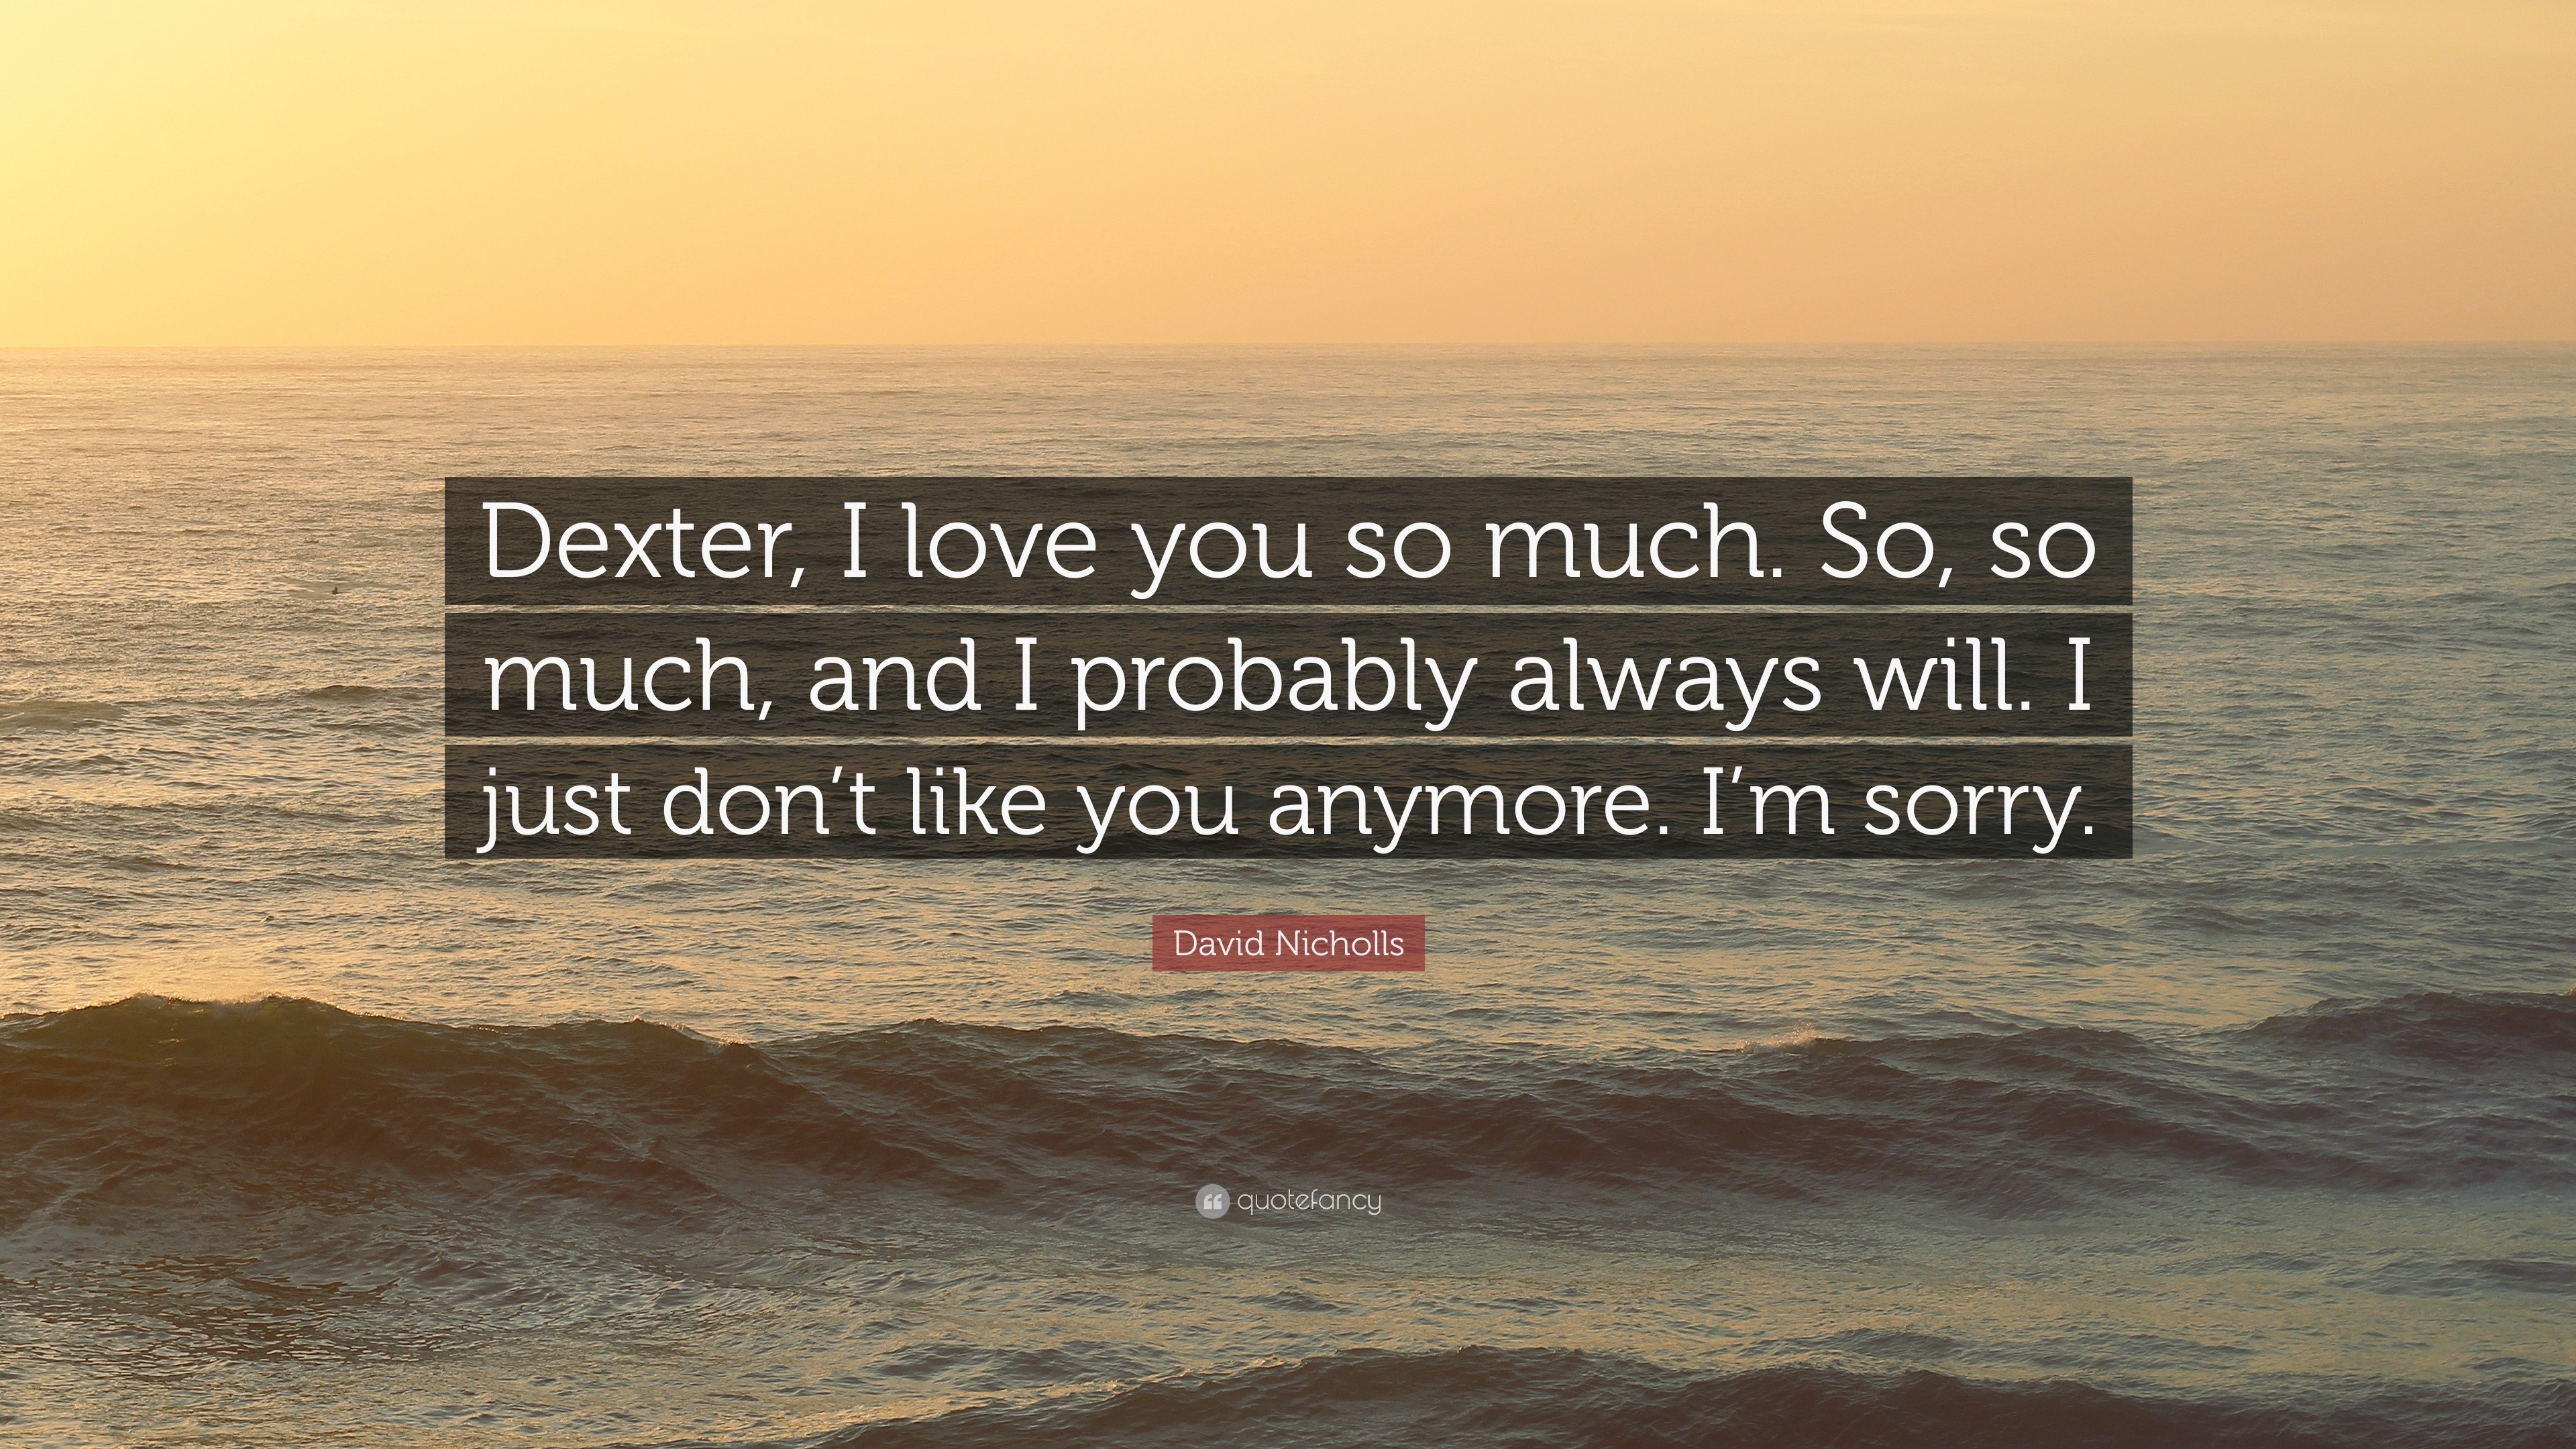 David Nicholls Quote “Dexter I love you so much So so